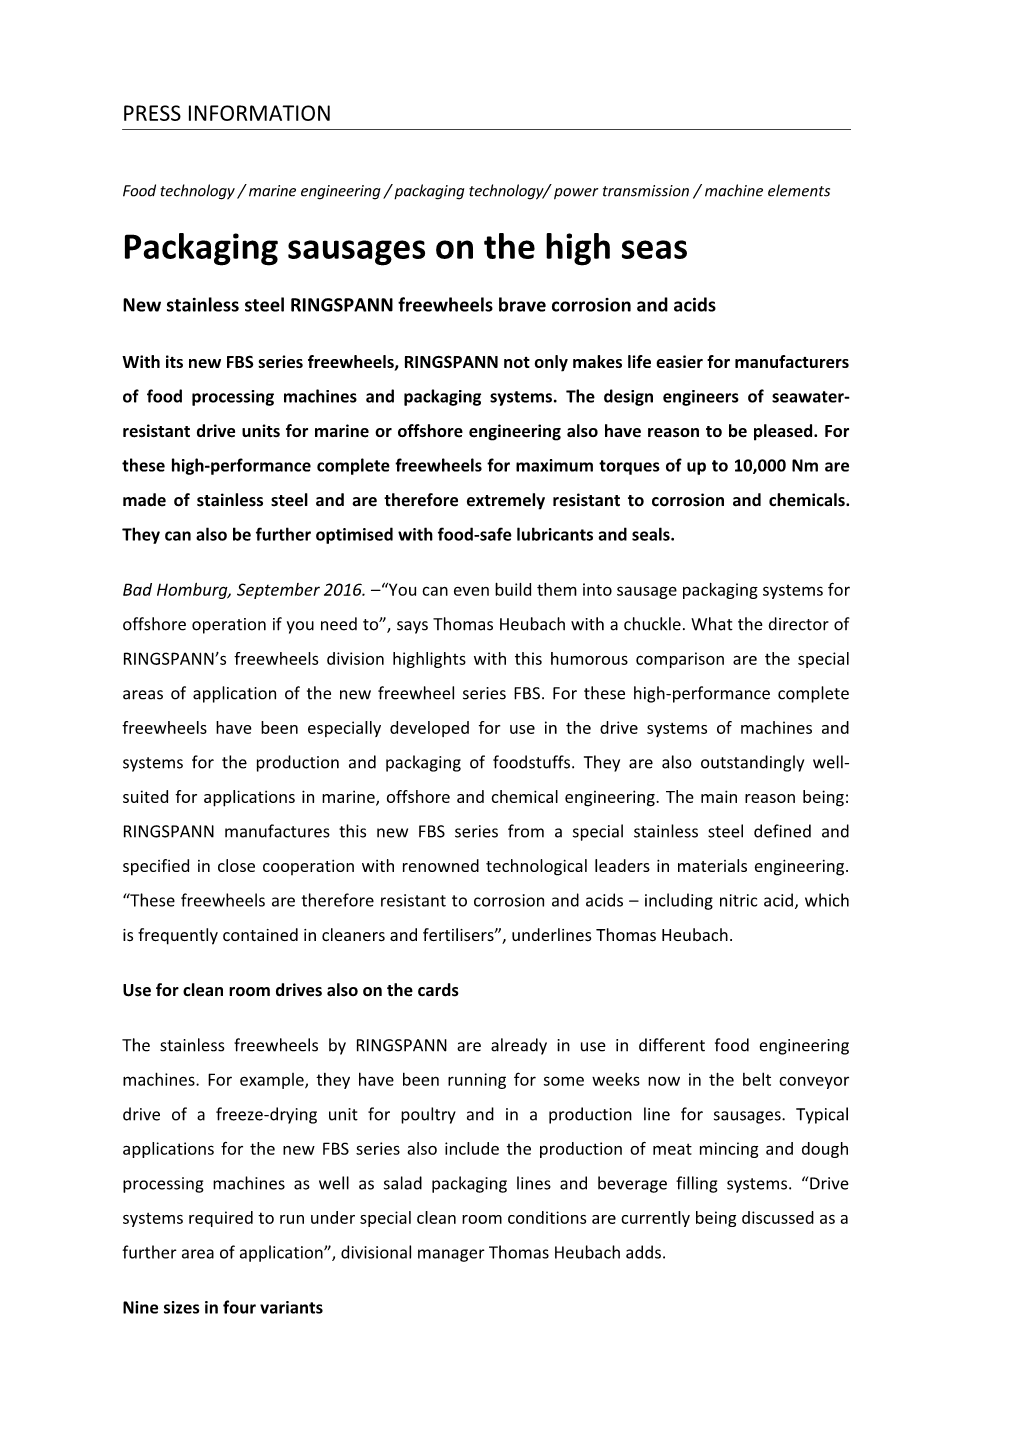 Packaging Sausages on the High Seas